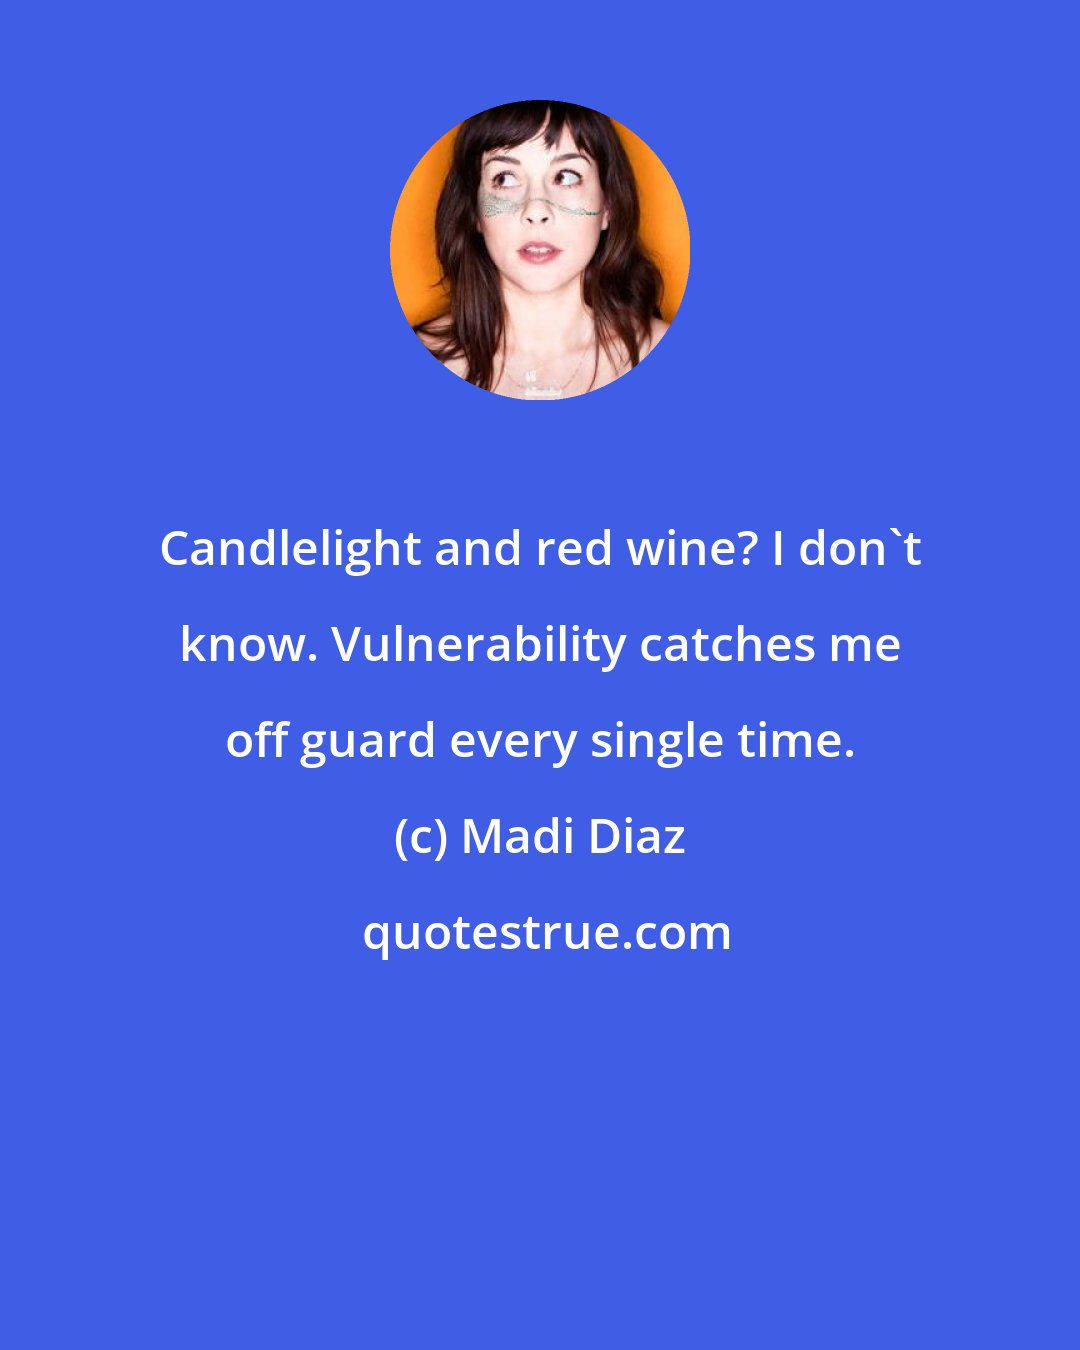 Madi Diaz: Candlelight and red wine? I don't know. Vulnerability catches me off guard every single time.